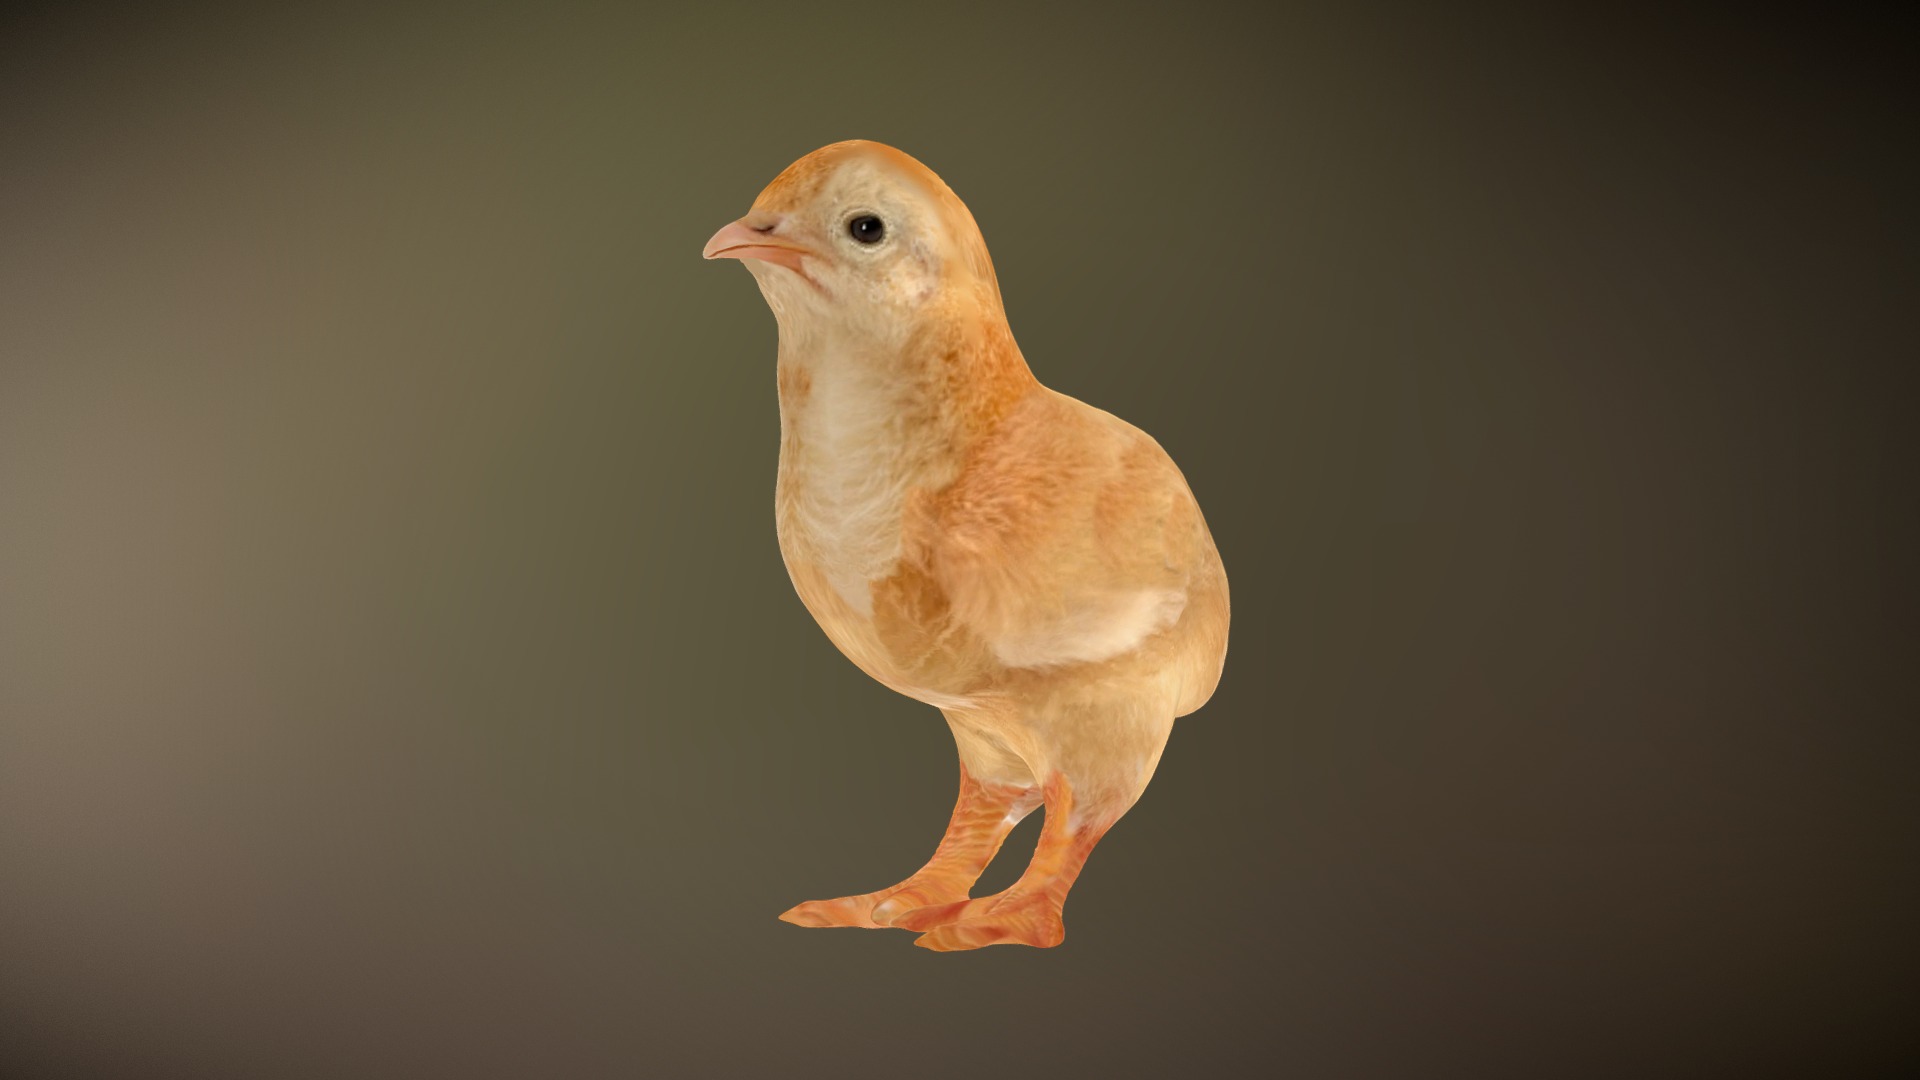 3D model Chick – Pulcino - This is a 3D model of the Chick - Pulcino. The 3D model is about a small chick on a black background.